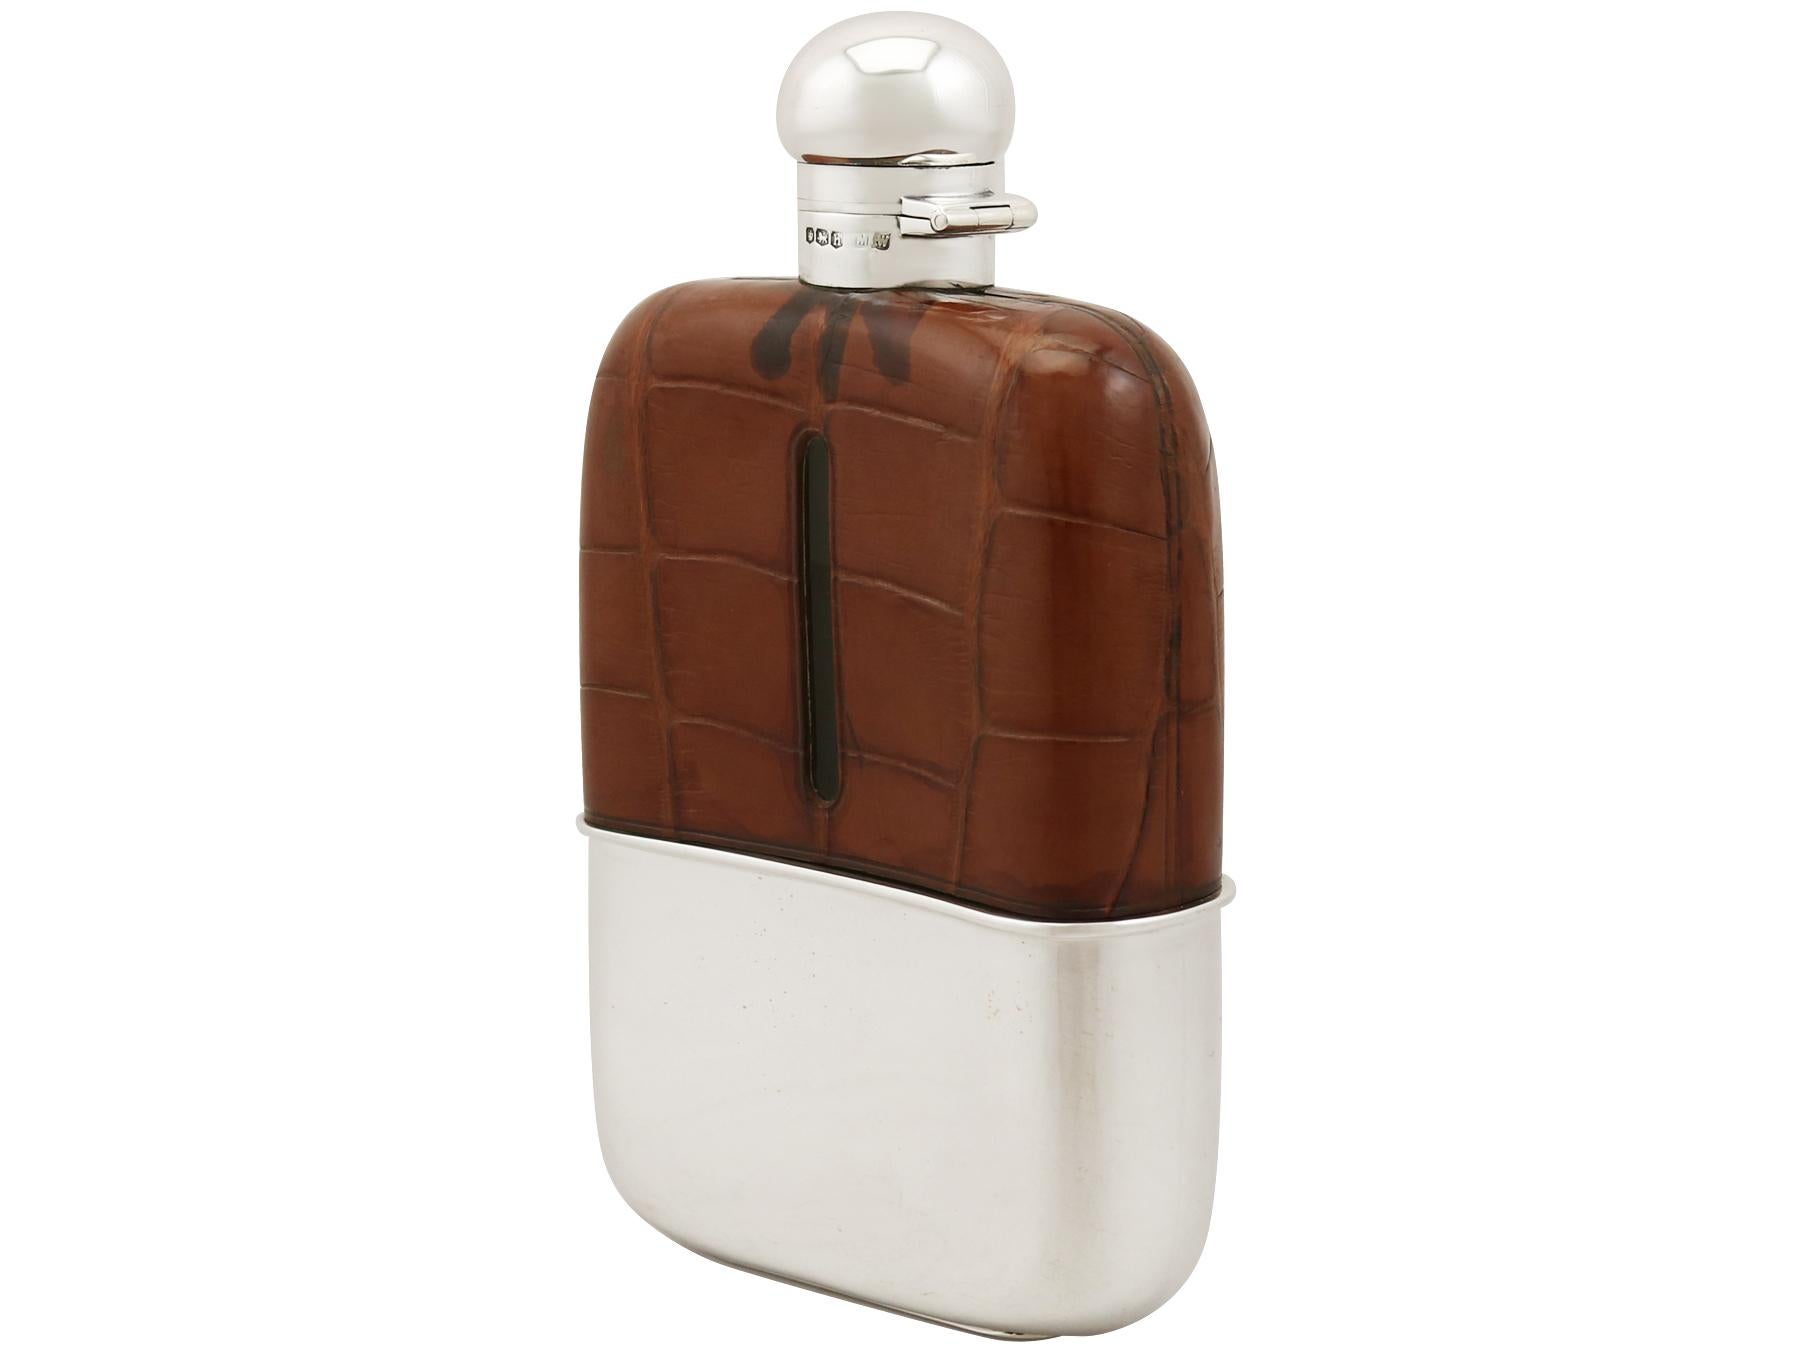 An exceptional, fine and impressive, large antique George V English sterling silver and crocodile skin mounted hip flask made by Mappin & Webb Ltd; part of our wine and drinks related silverware collection.

This exceptional antique George V